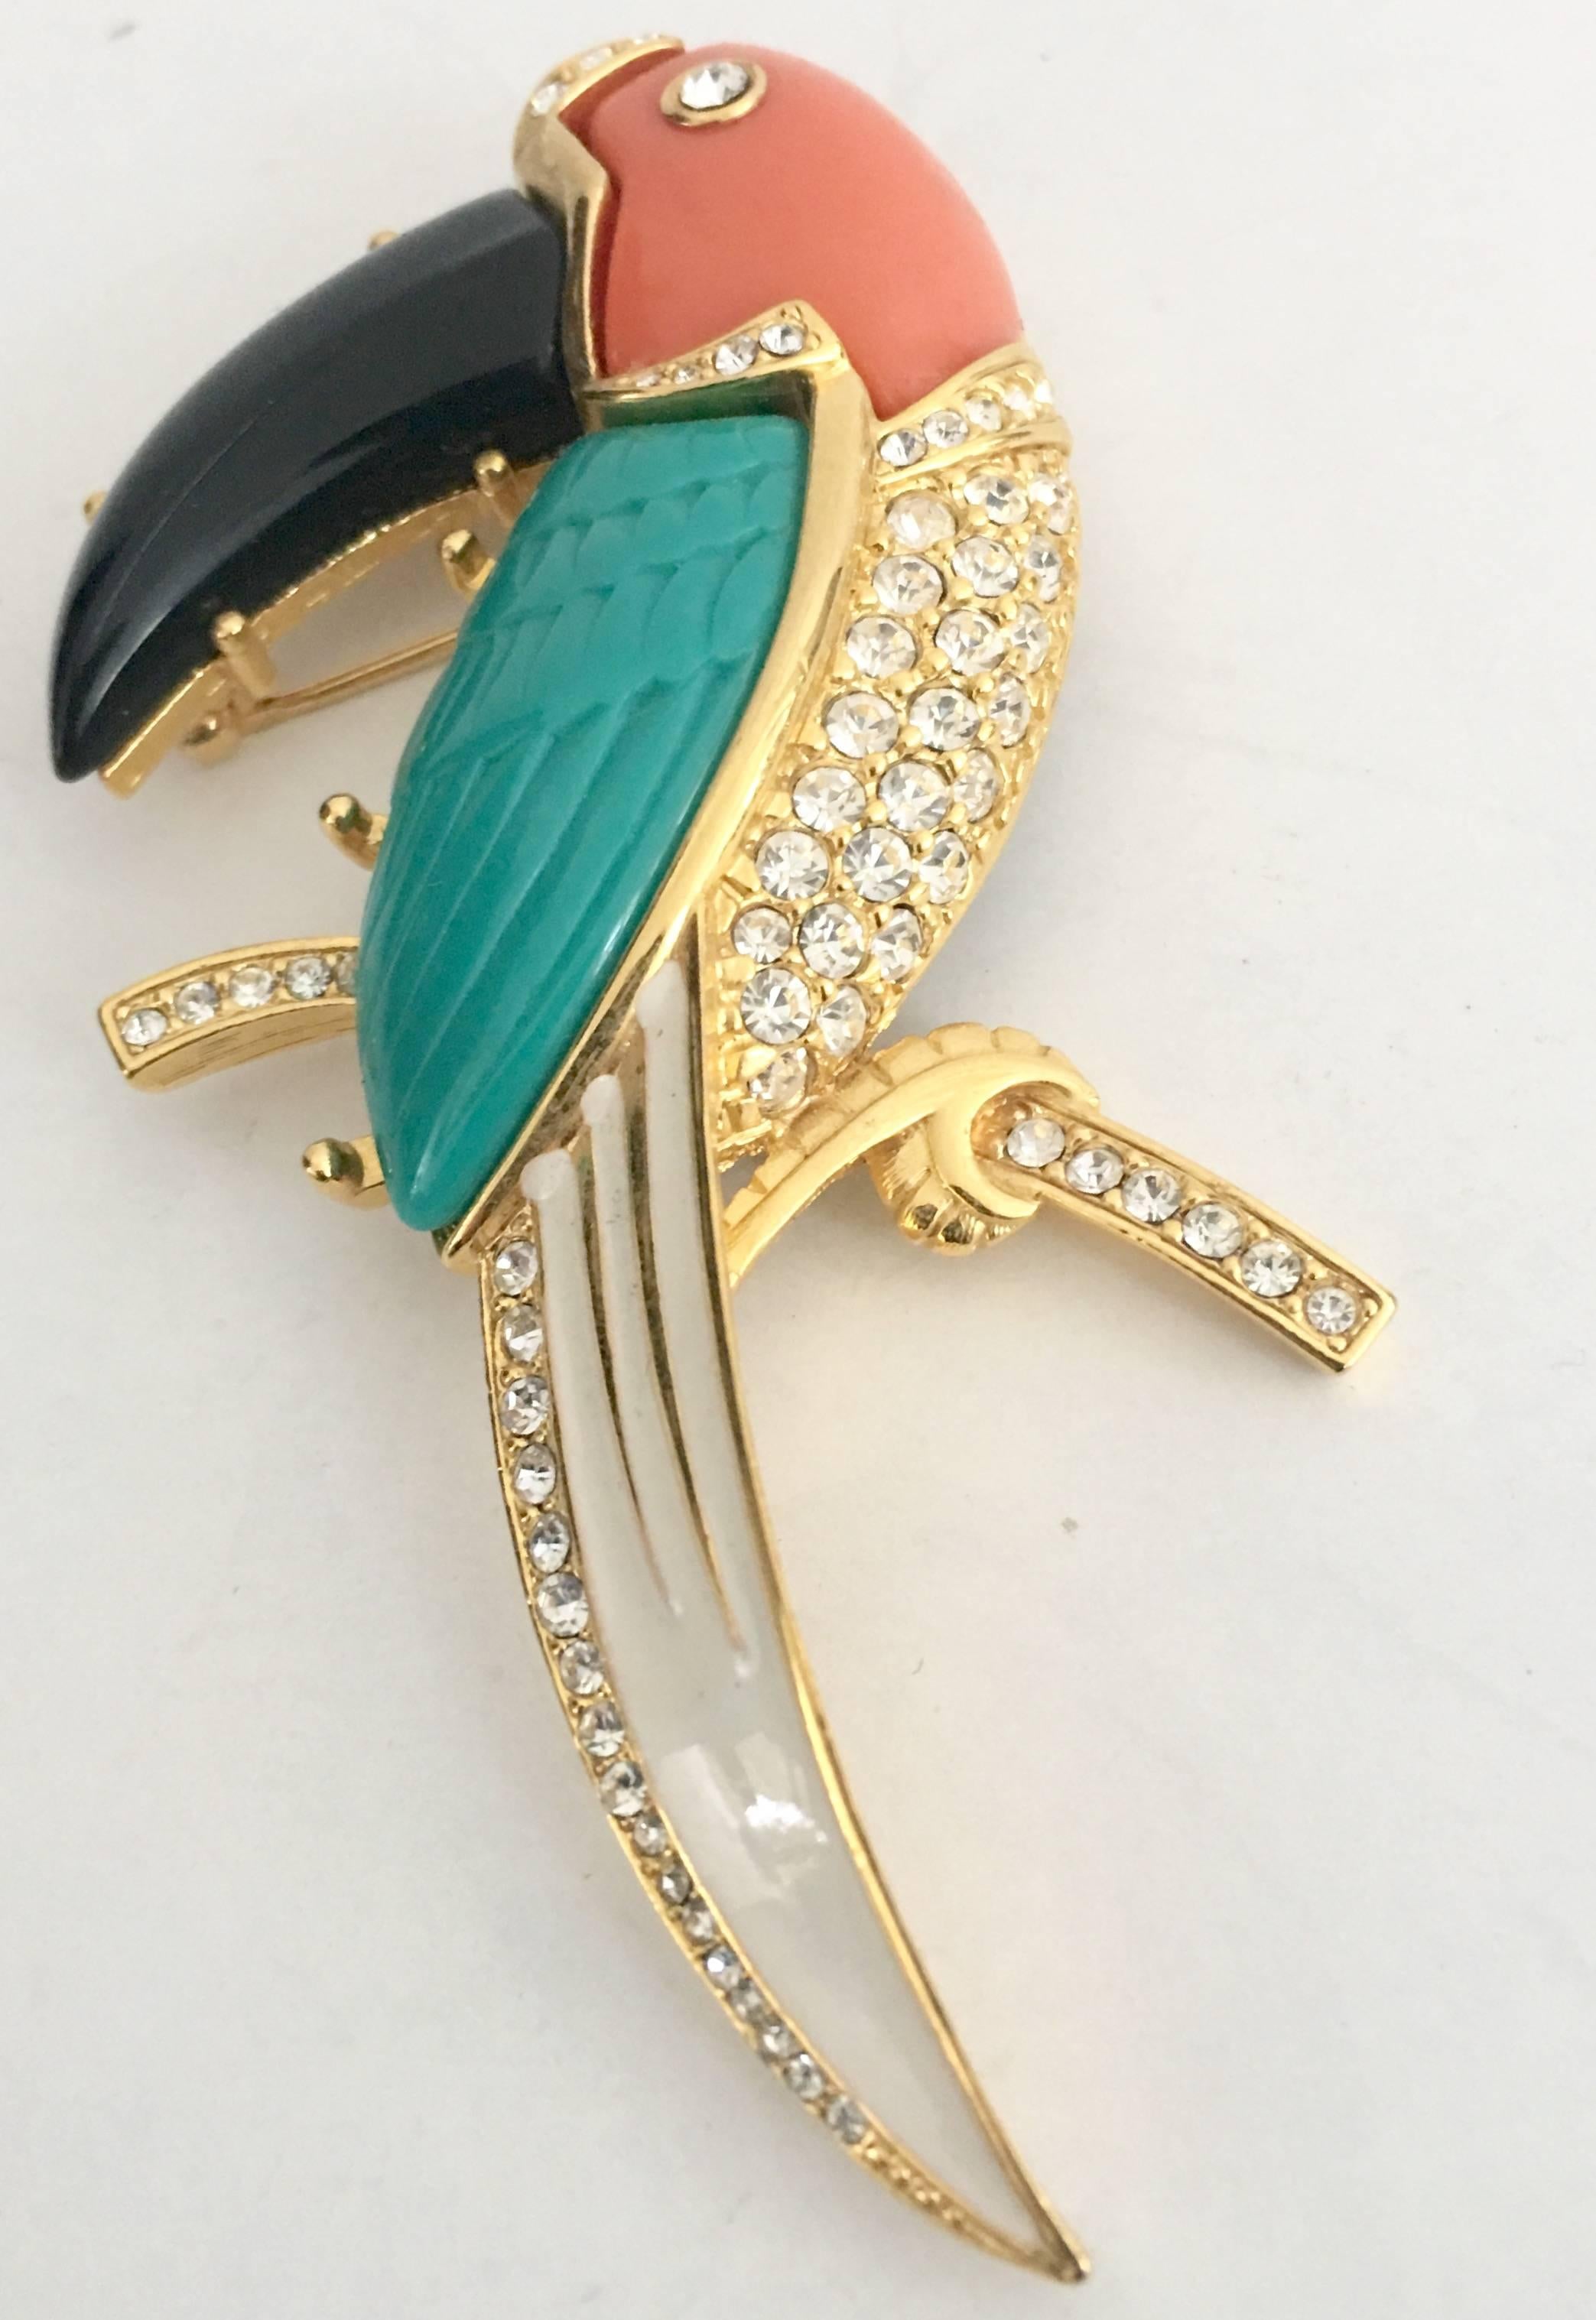 Kenneth J Lane Signed gold-plate with crystal clear rhinestones Toucan Bird Brooch. Features, enamel and faux resin coral, turquoise and black onyx with pave set Swarovski crystal clear rhinestones . brooch. Signed "KJL" on the underside.